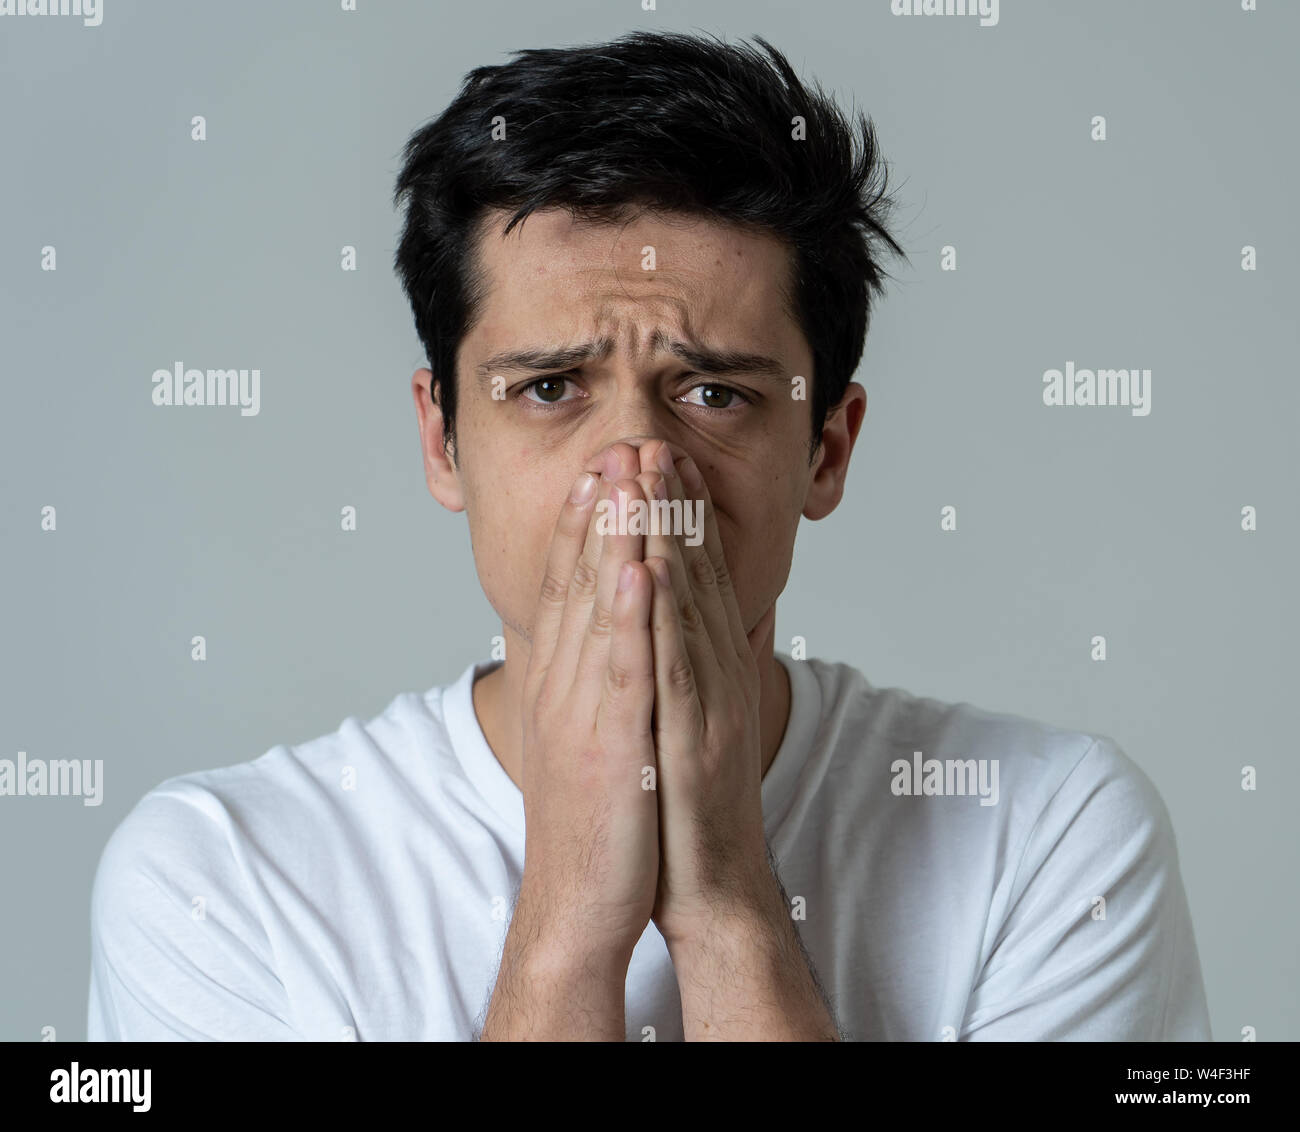 Close up of a young sad man, serious and concerned, looking worried and thoughtful. Covering her mouth like sneezing, feeling feverish and cold. With Stock Photo